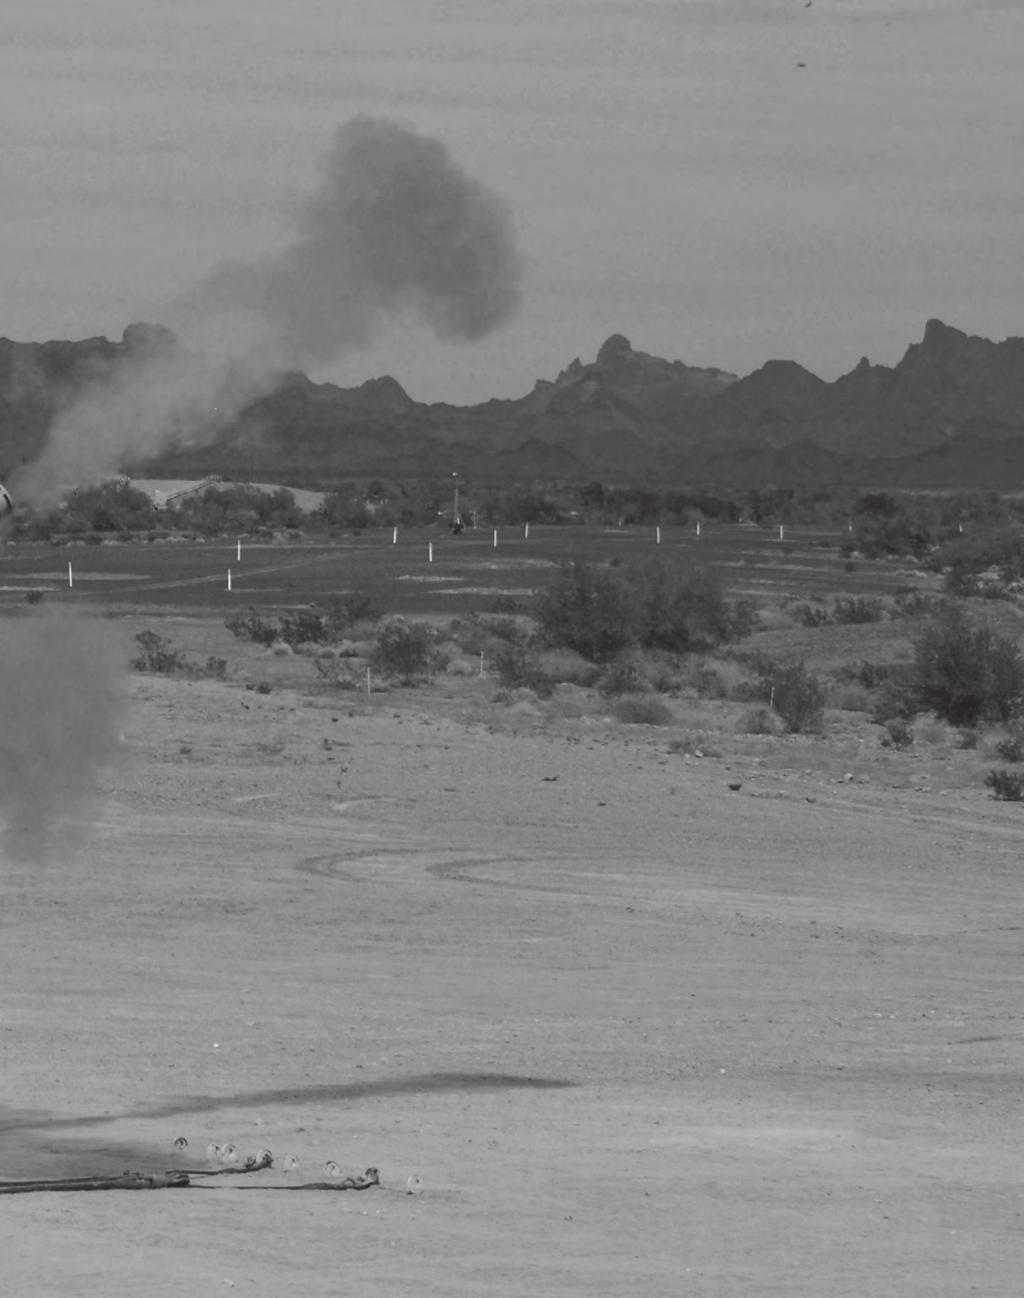 The NLOS-C is one of eight FCS MGVs. Depicted here is the NLOS-C Concept Technology Demonstrator firing its first live-fire round at Yuma Proving Ground, AZ.